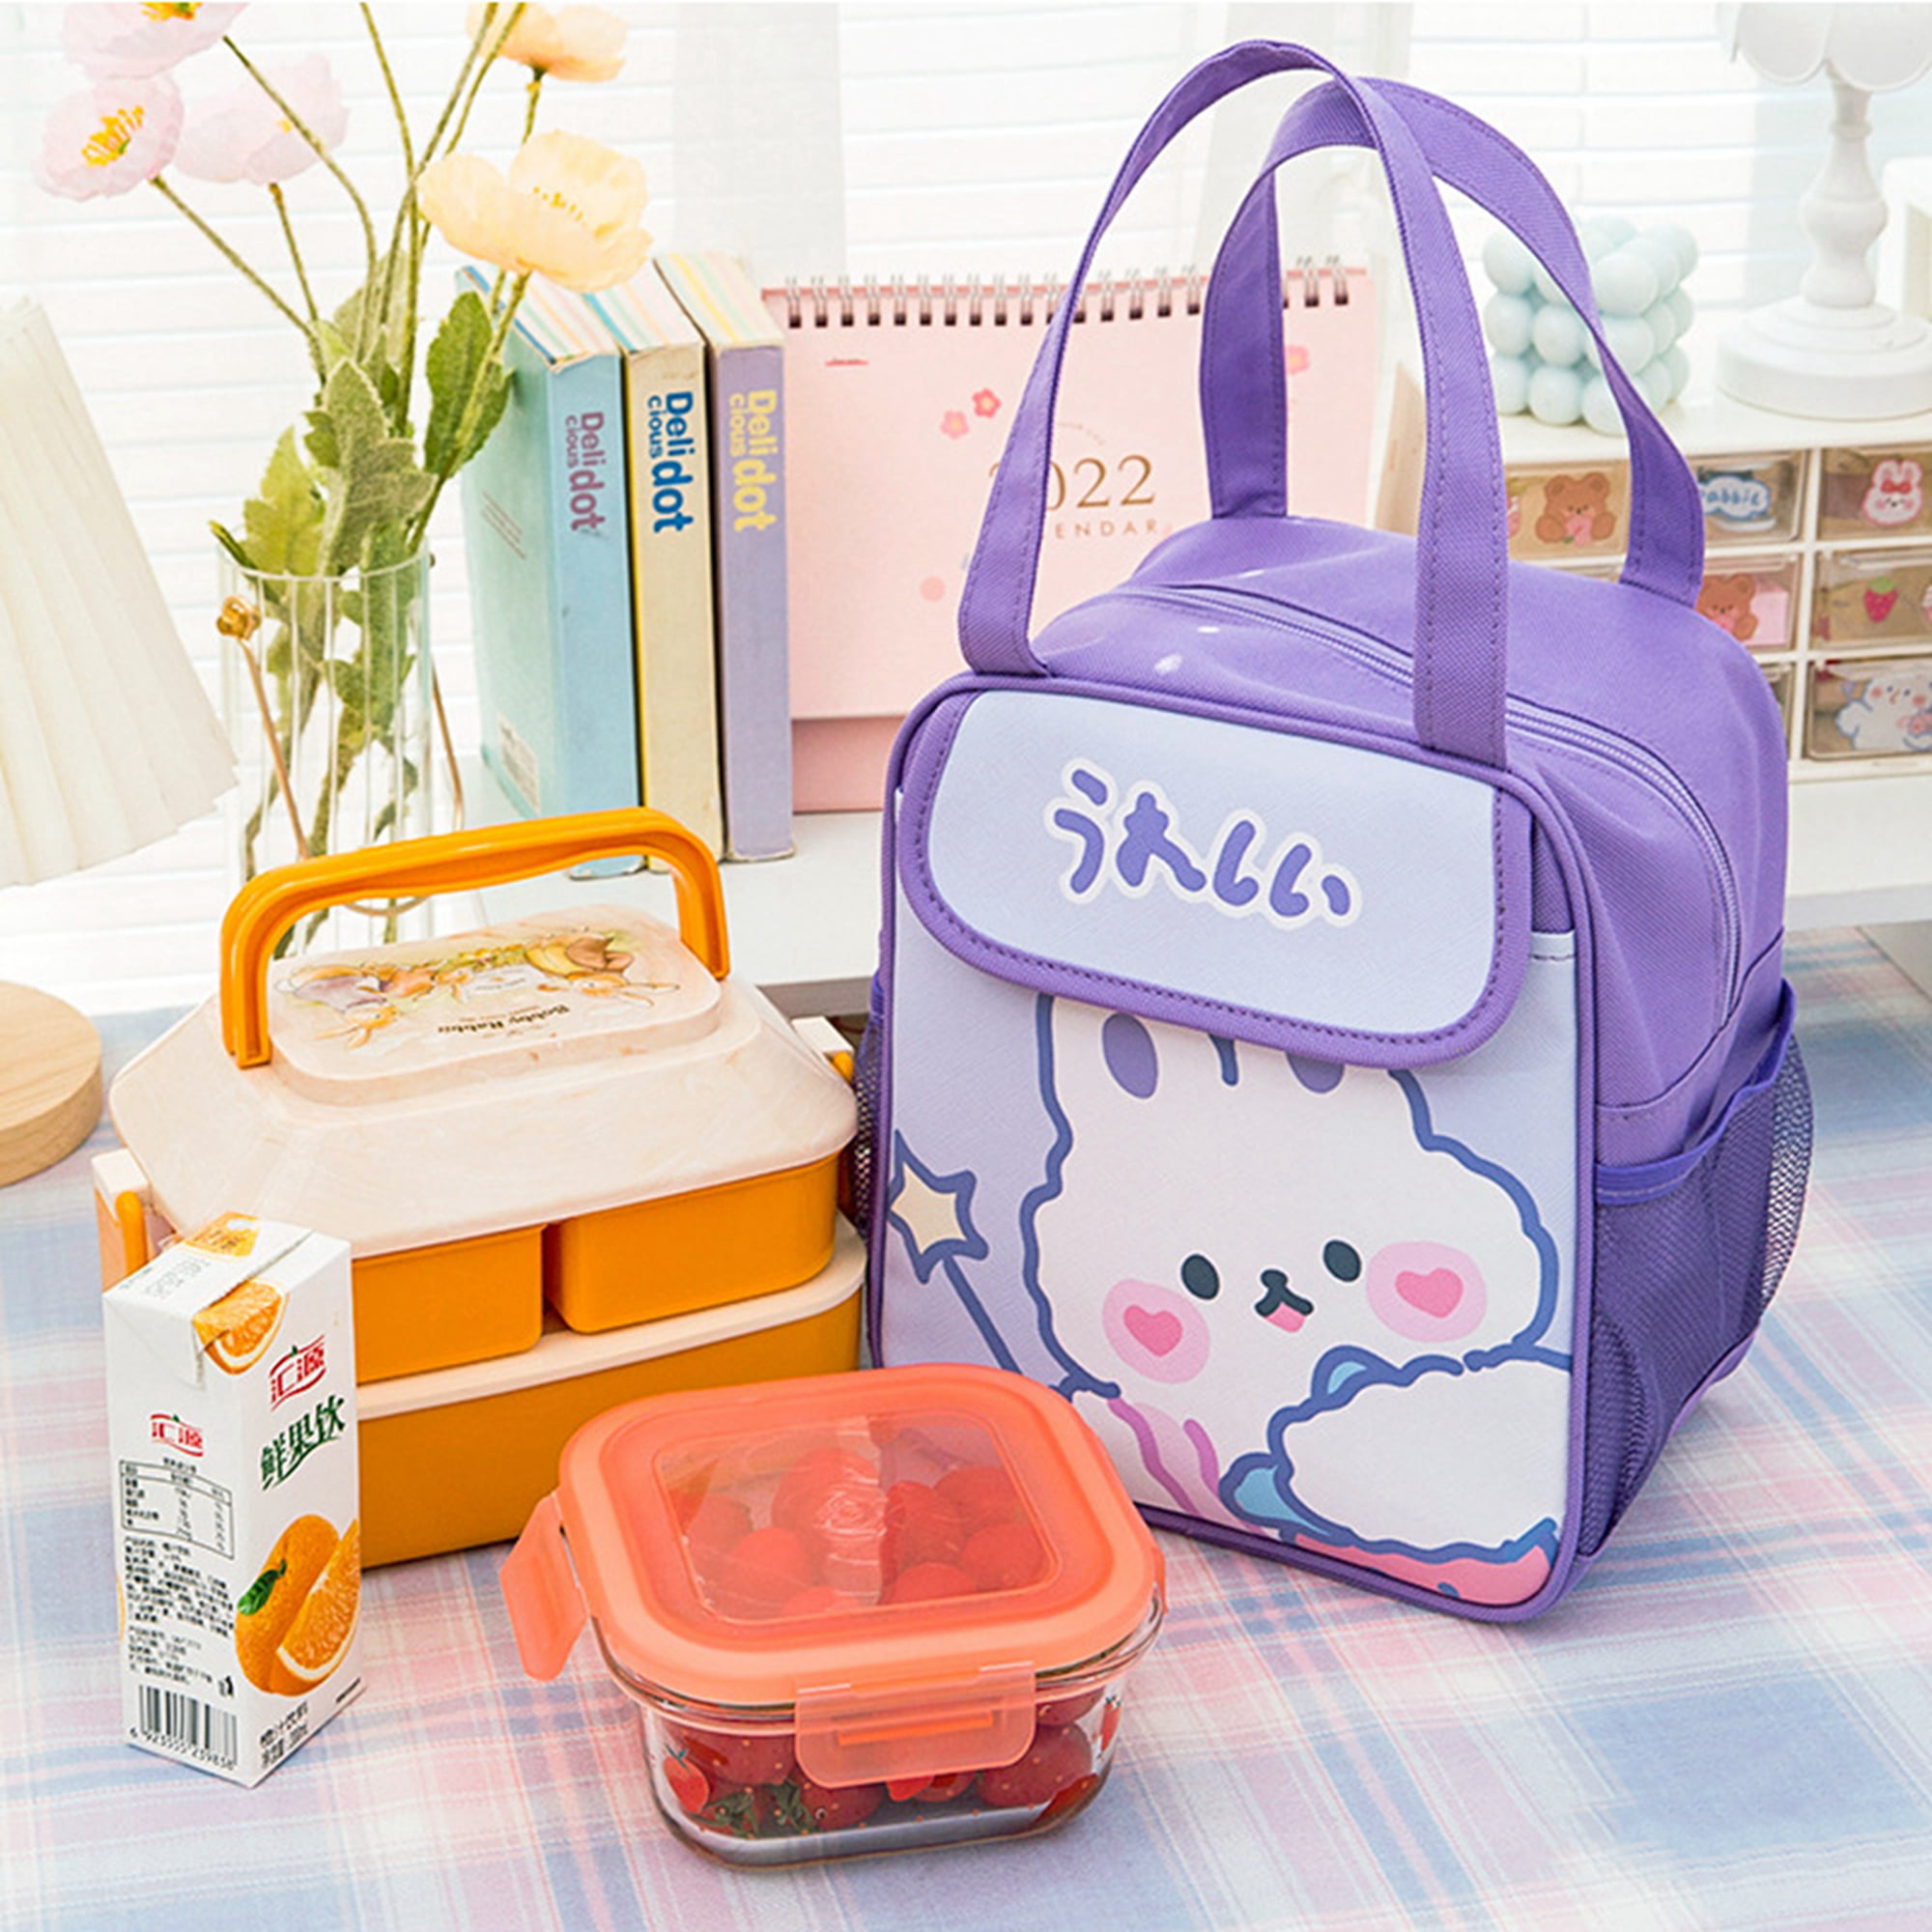  LUREMADE Kids Insulated Lunch Box for Girls Lunch Bag Women  Boys Toddler Teen School Daycare Kawaii Cute Travel bags (Rainbow Tie-Dye):  Home & Kitchen